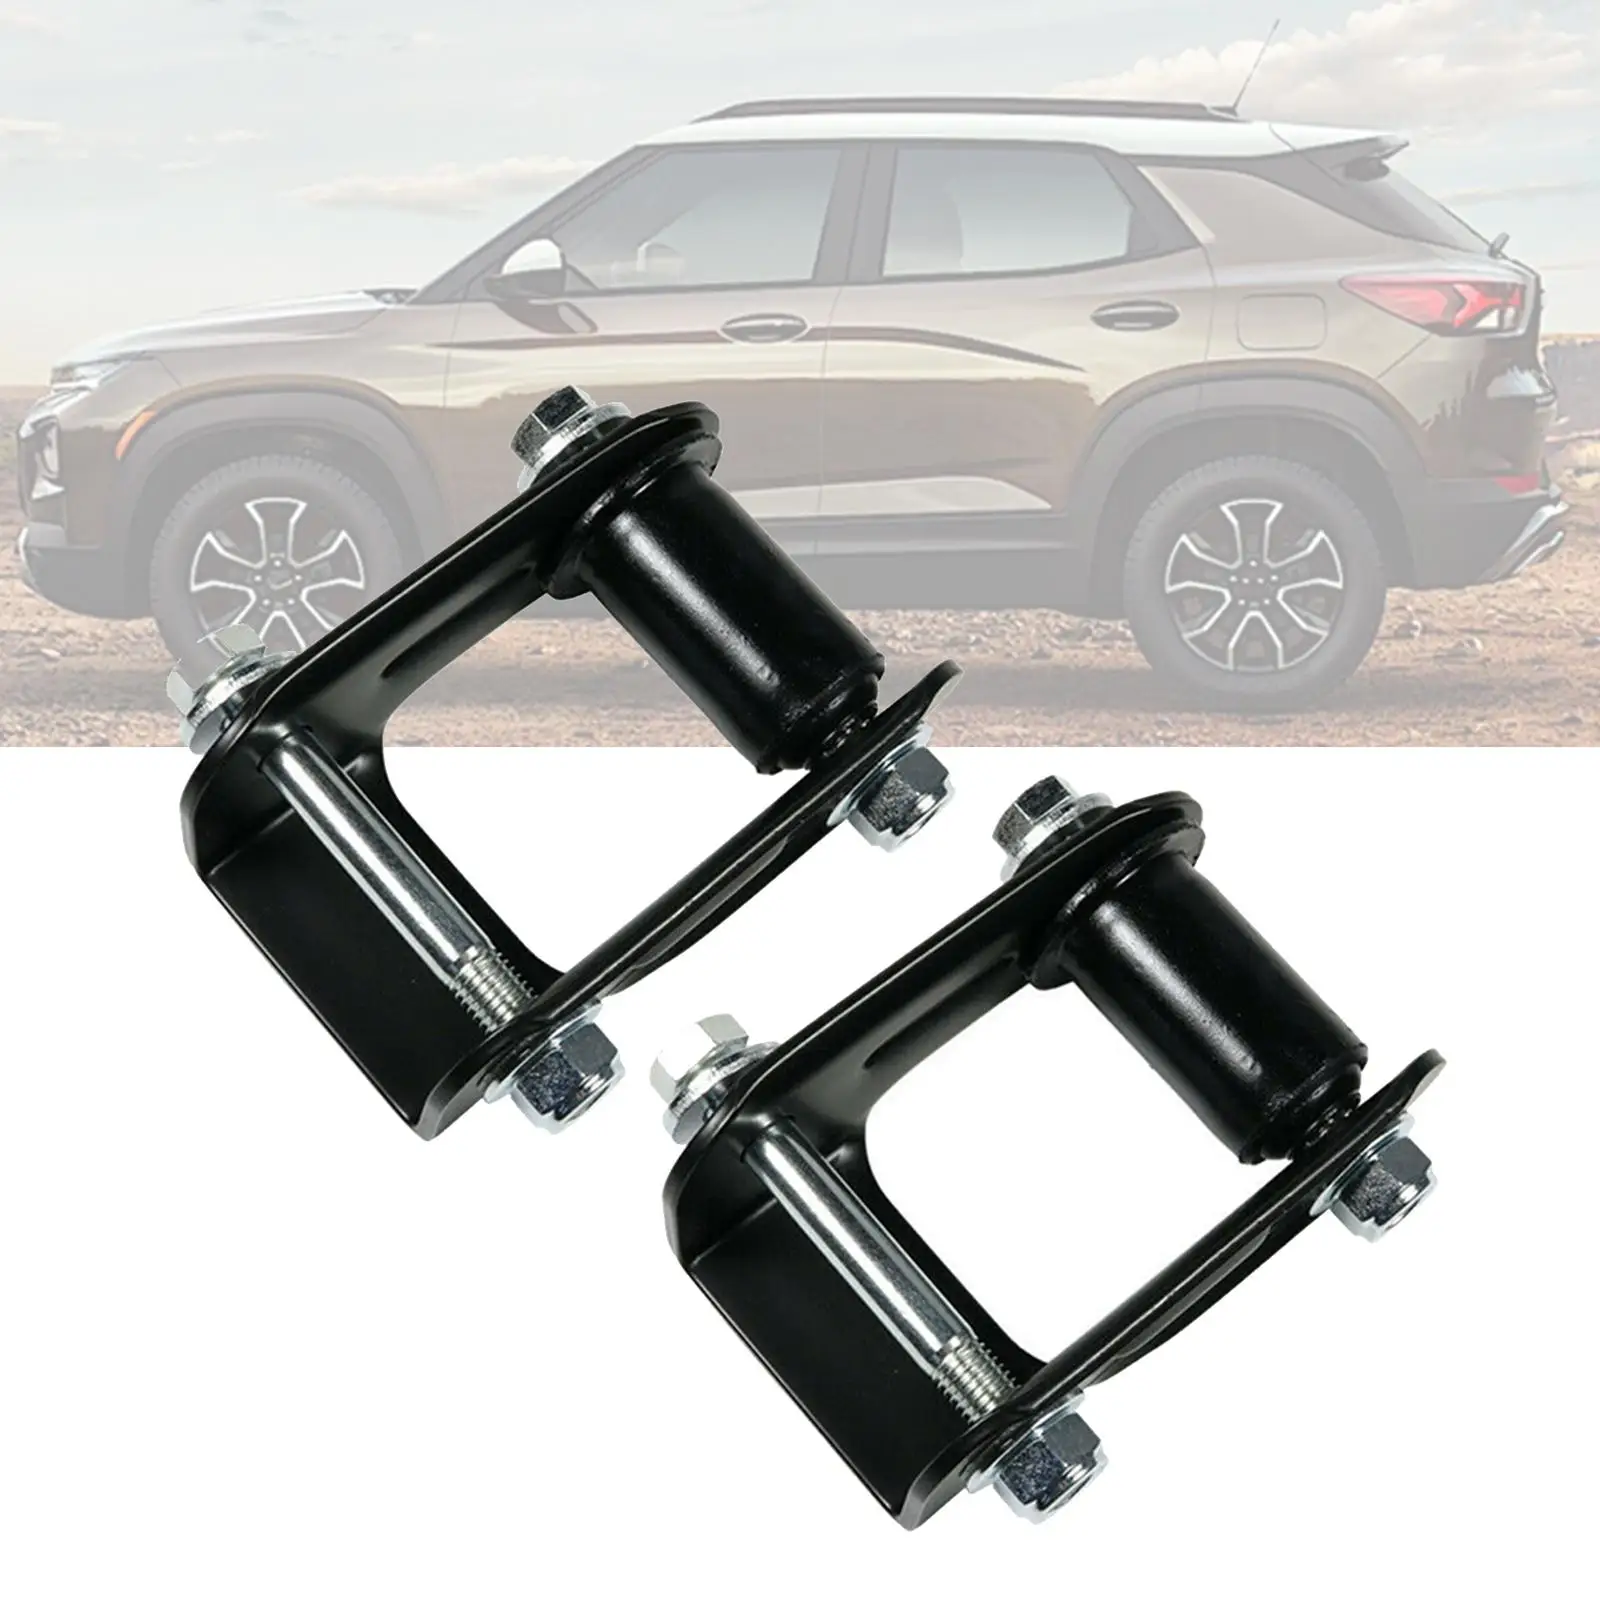 2x Leaf Spring Shackle Kit Professional Spare Parts Automotive Decorative Accessory for Chevrolet S10 Pickup S10 Blazer